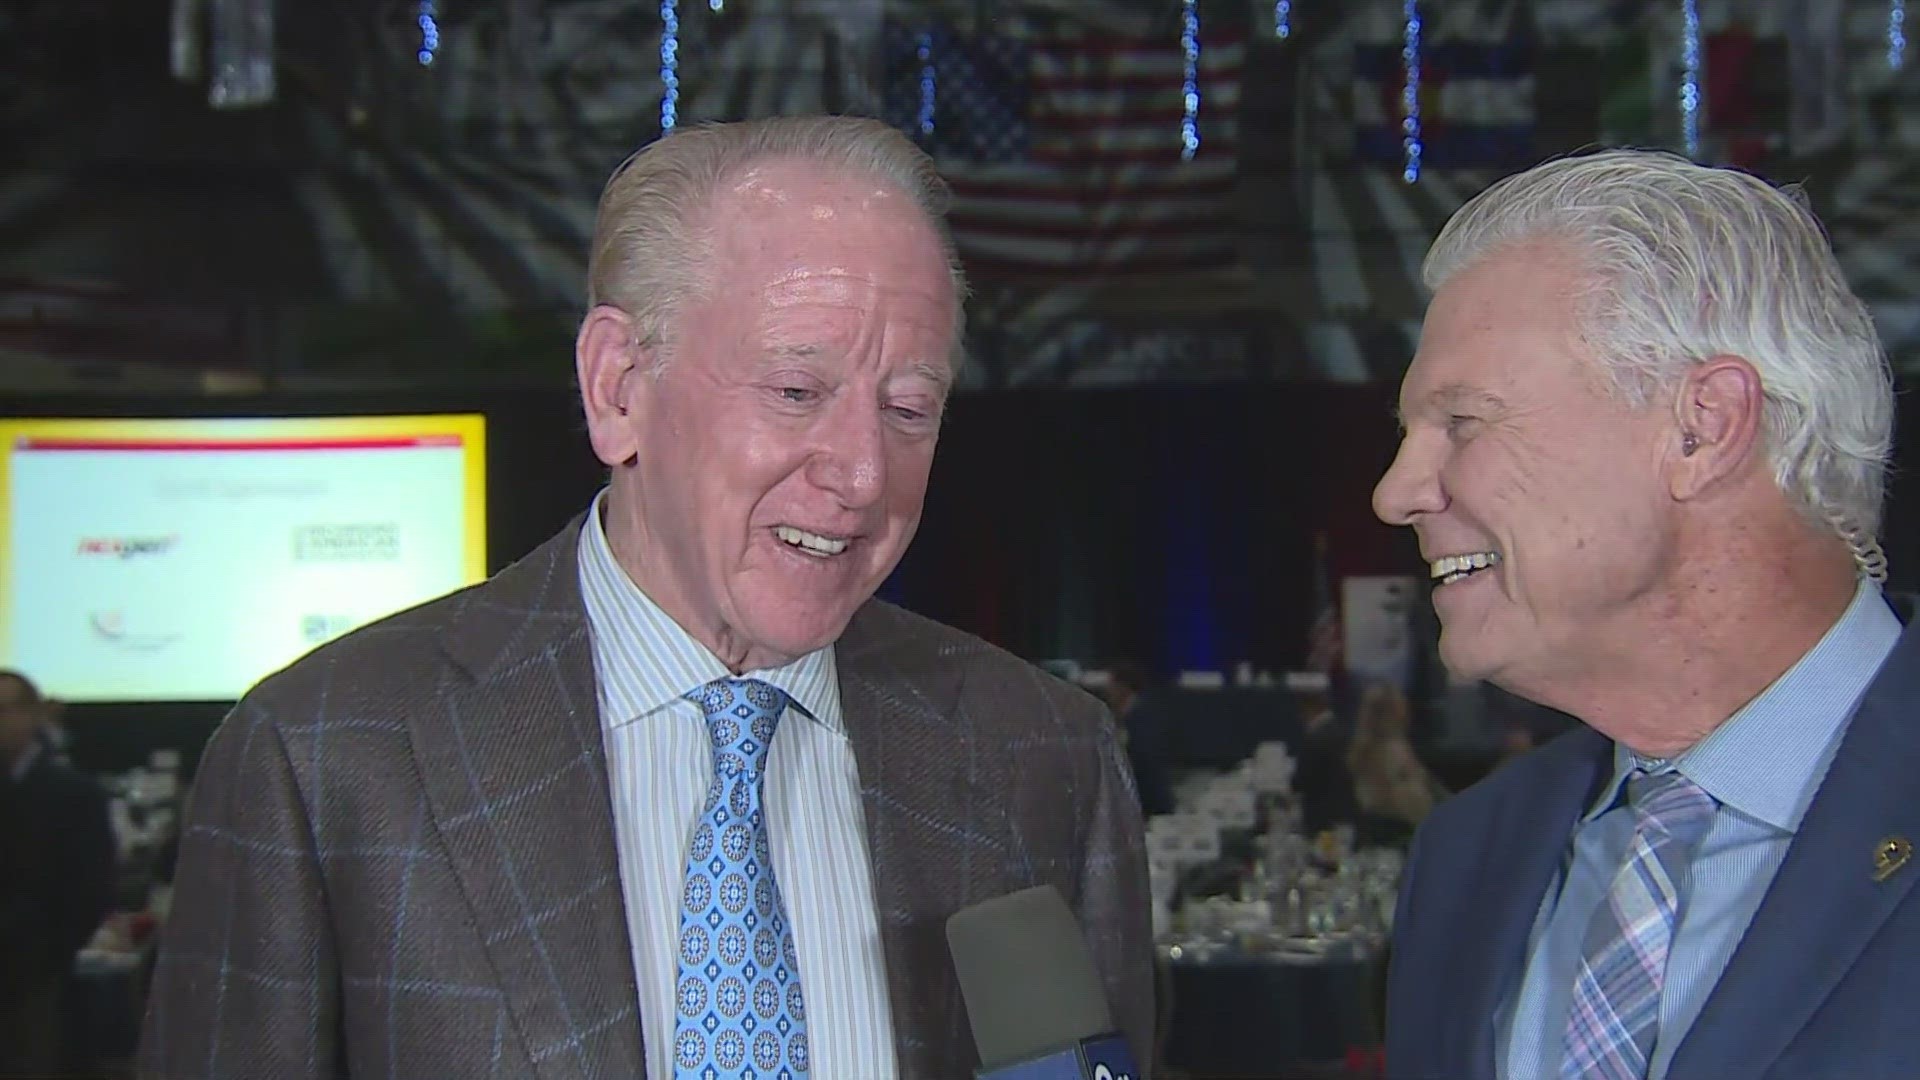 Mike Klis catches up with Archie Manning at the 46th Annual Boy Scouts of America Sports Breakfast.